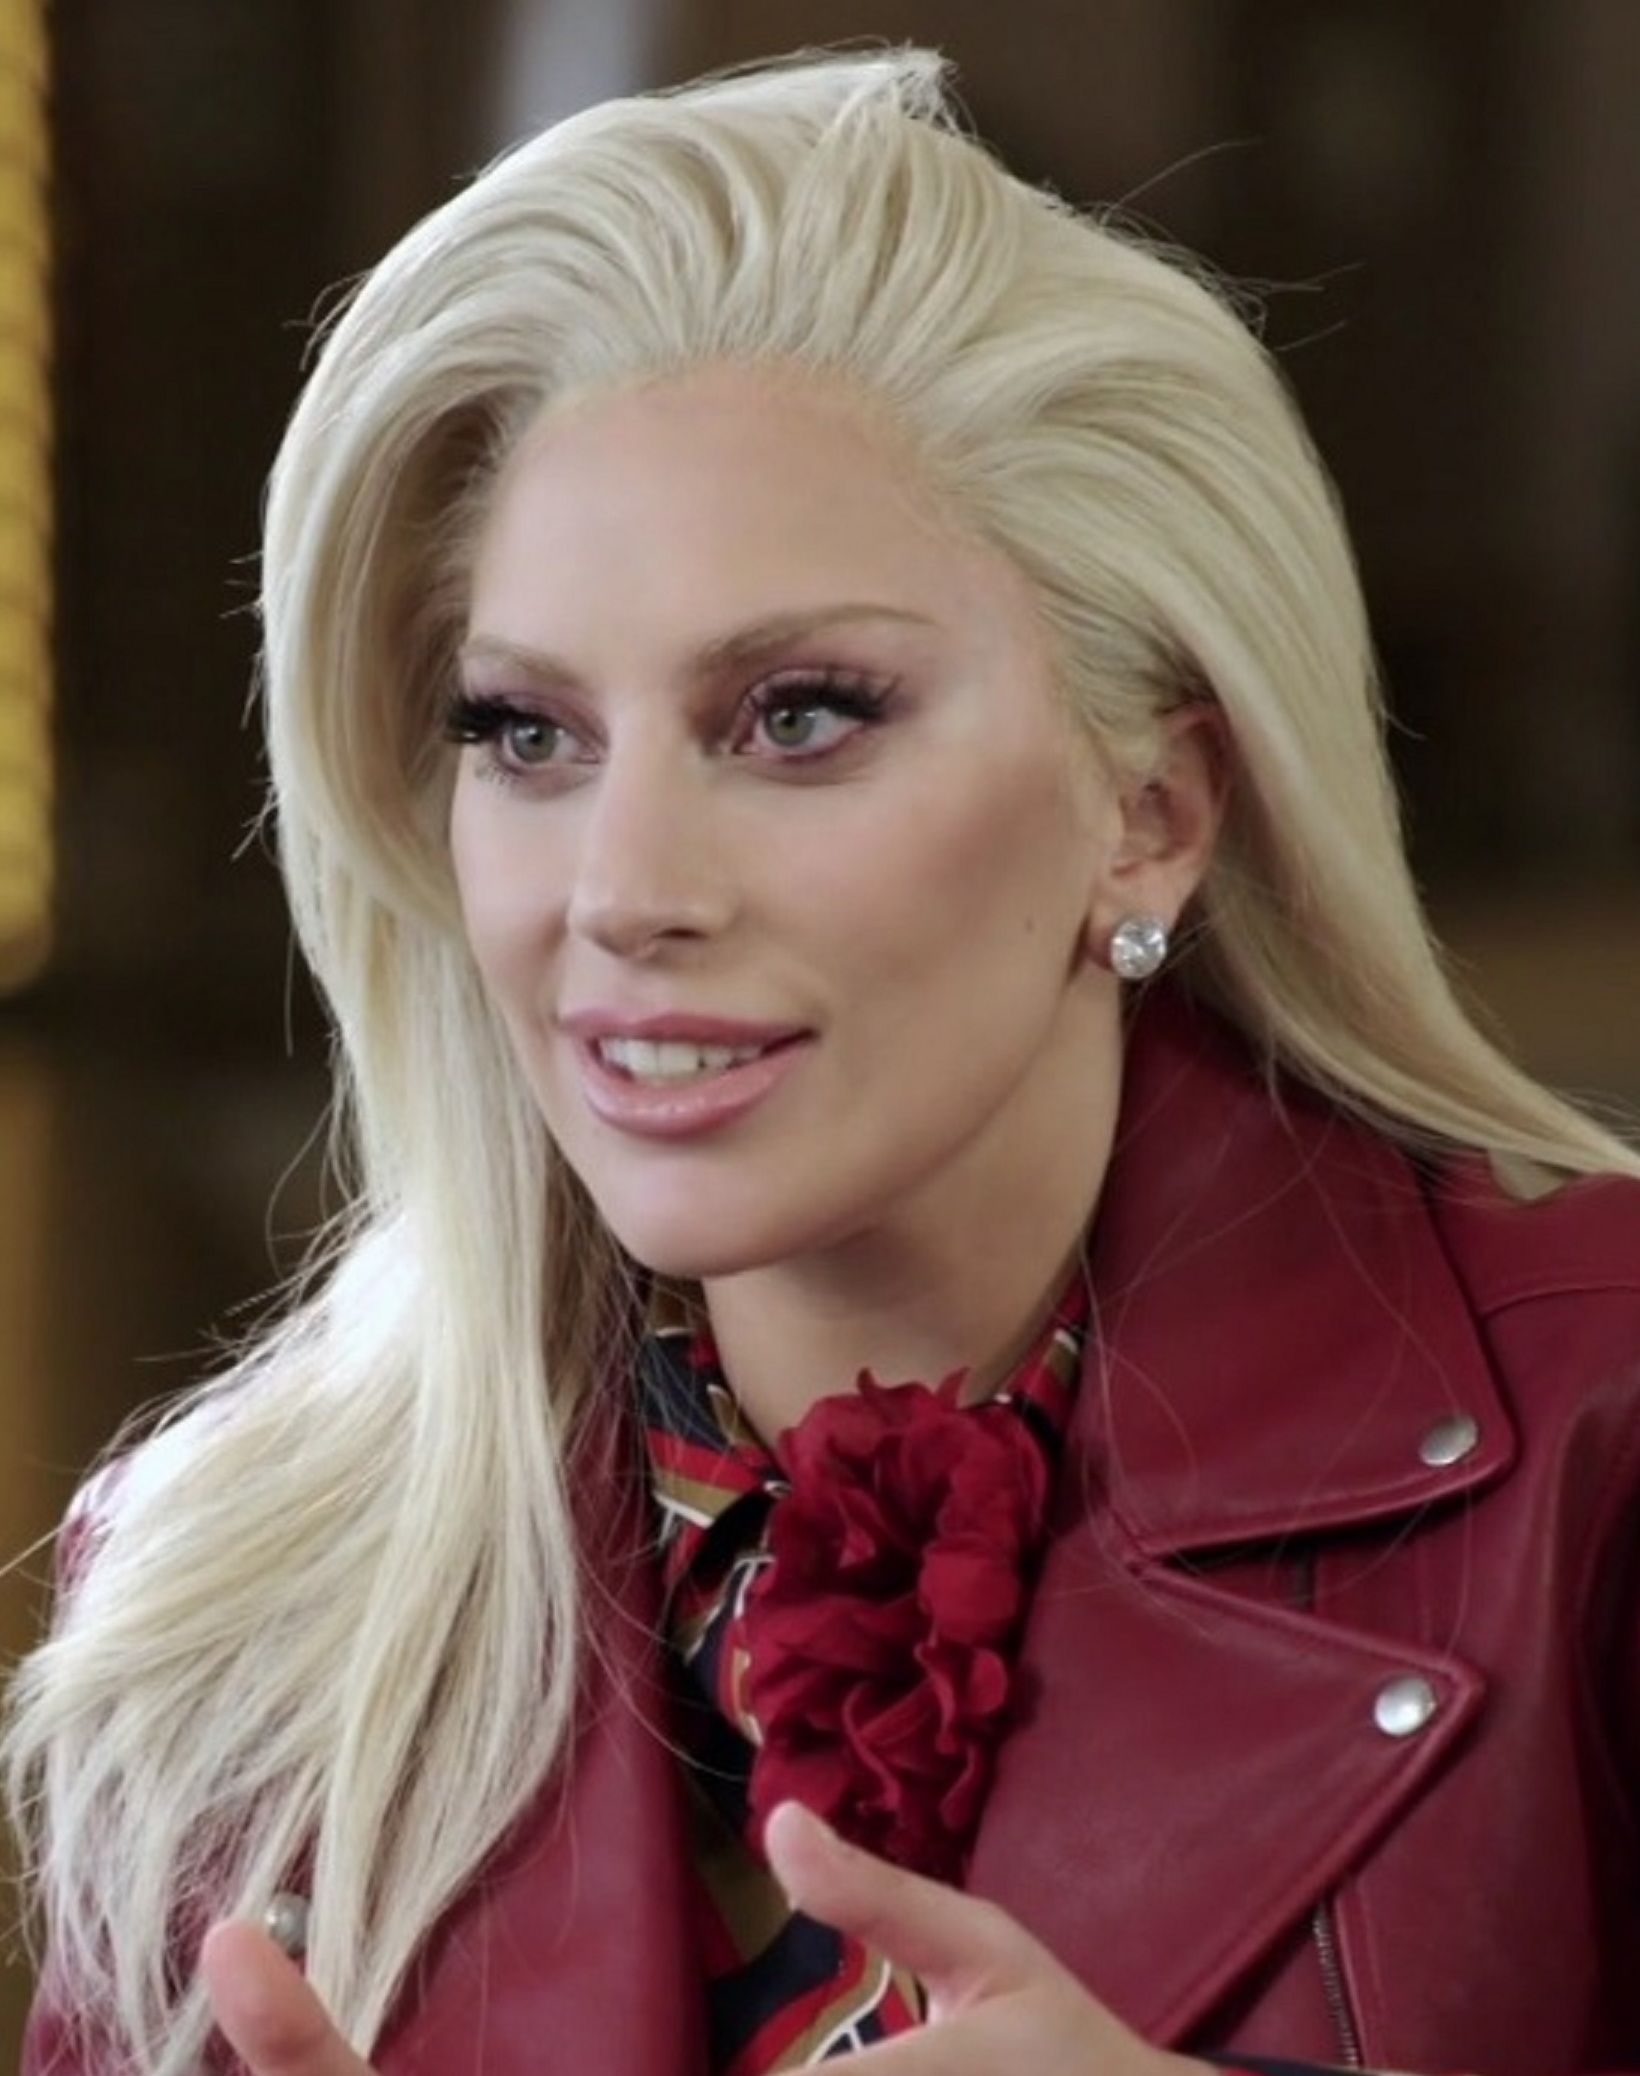 File:Lady Gaga at interview in 2016 (cropped).jpg - Wikimedia Commons